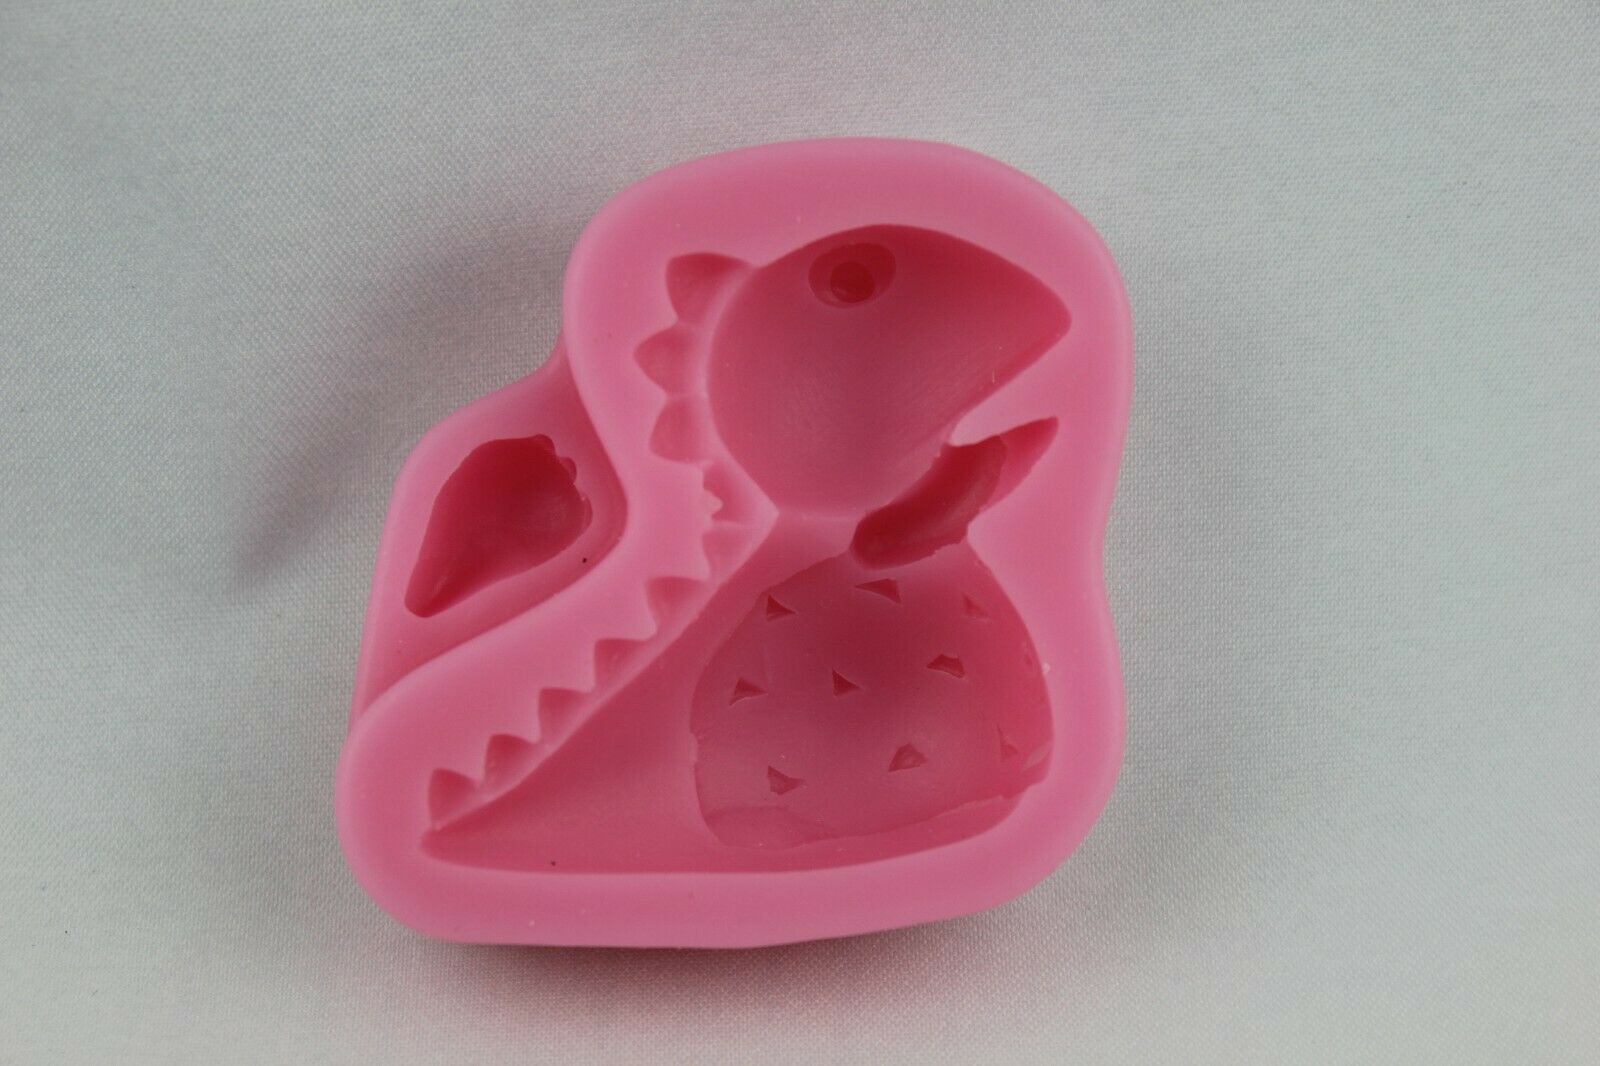 attachment-https://www.cupcakeaddicts.co.uk/wp-content/uploads/imported/7/Small-Dinosaur-Silicone-Mould-Icing-Cake-Decorating-Paste-Baking-Sugarcraft-3-324317404047-2.jpg